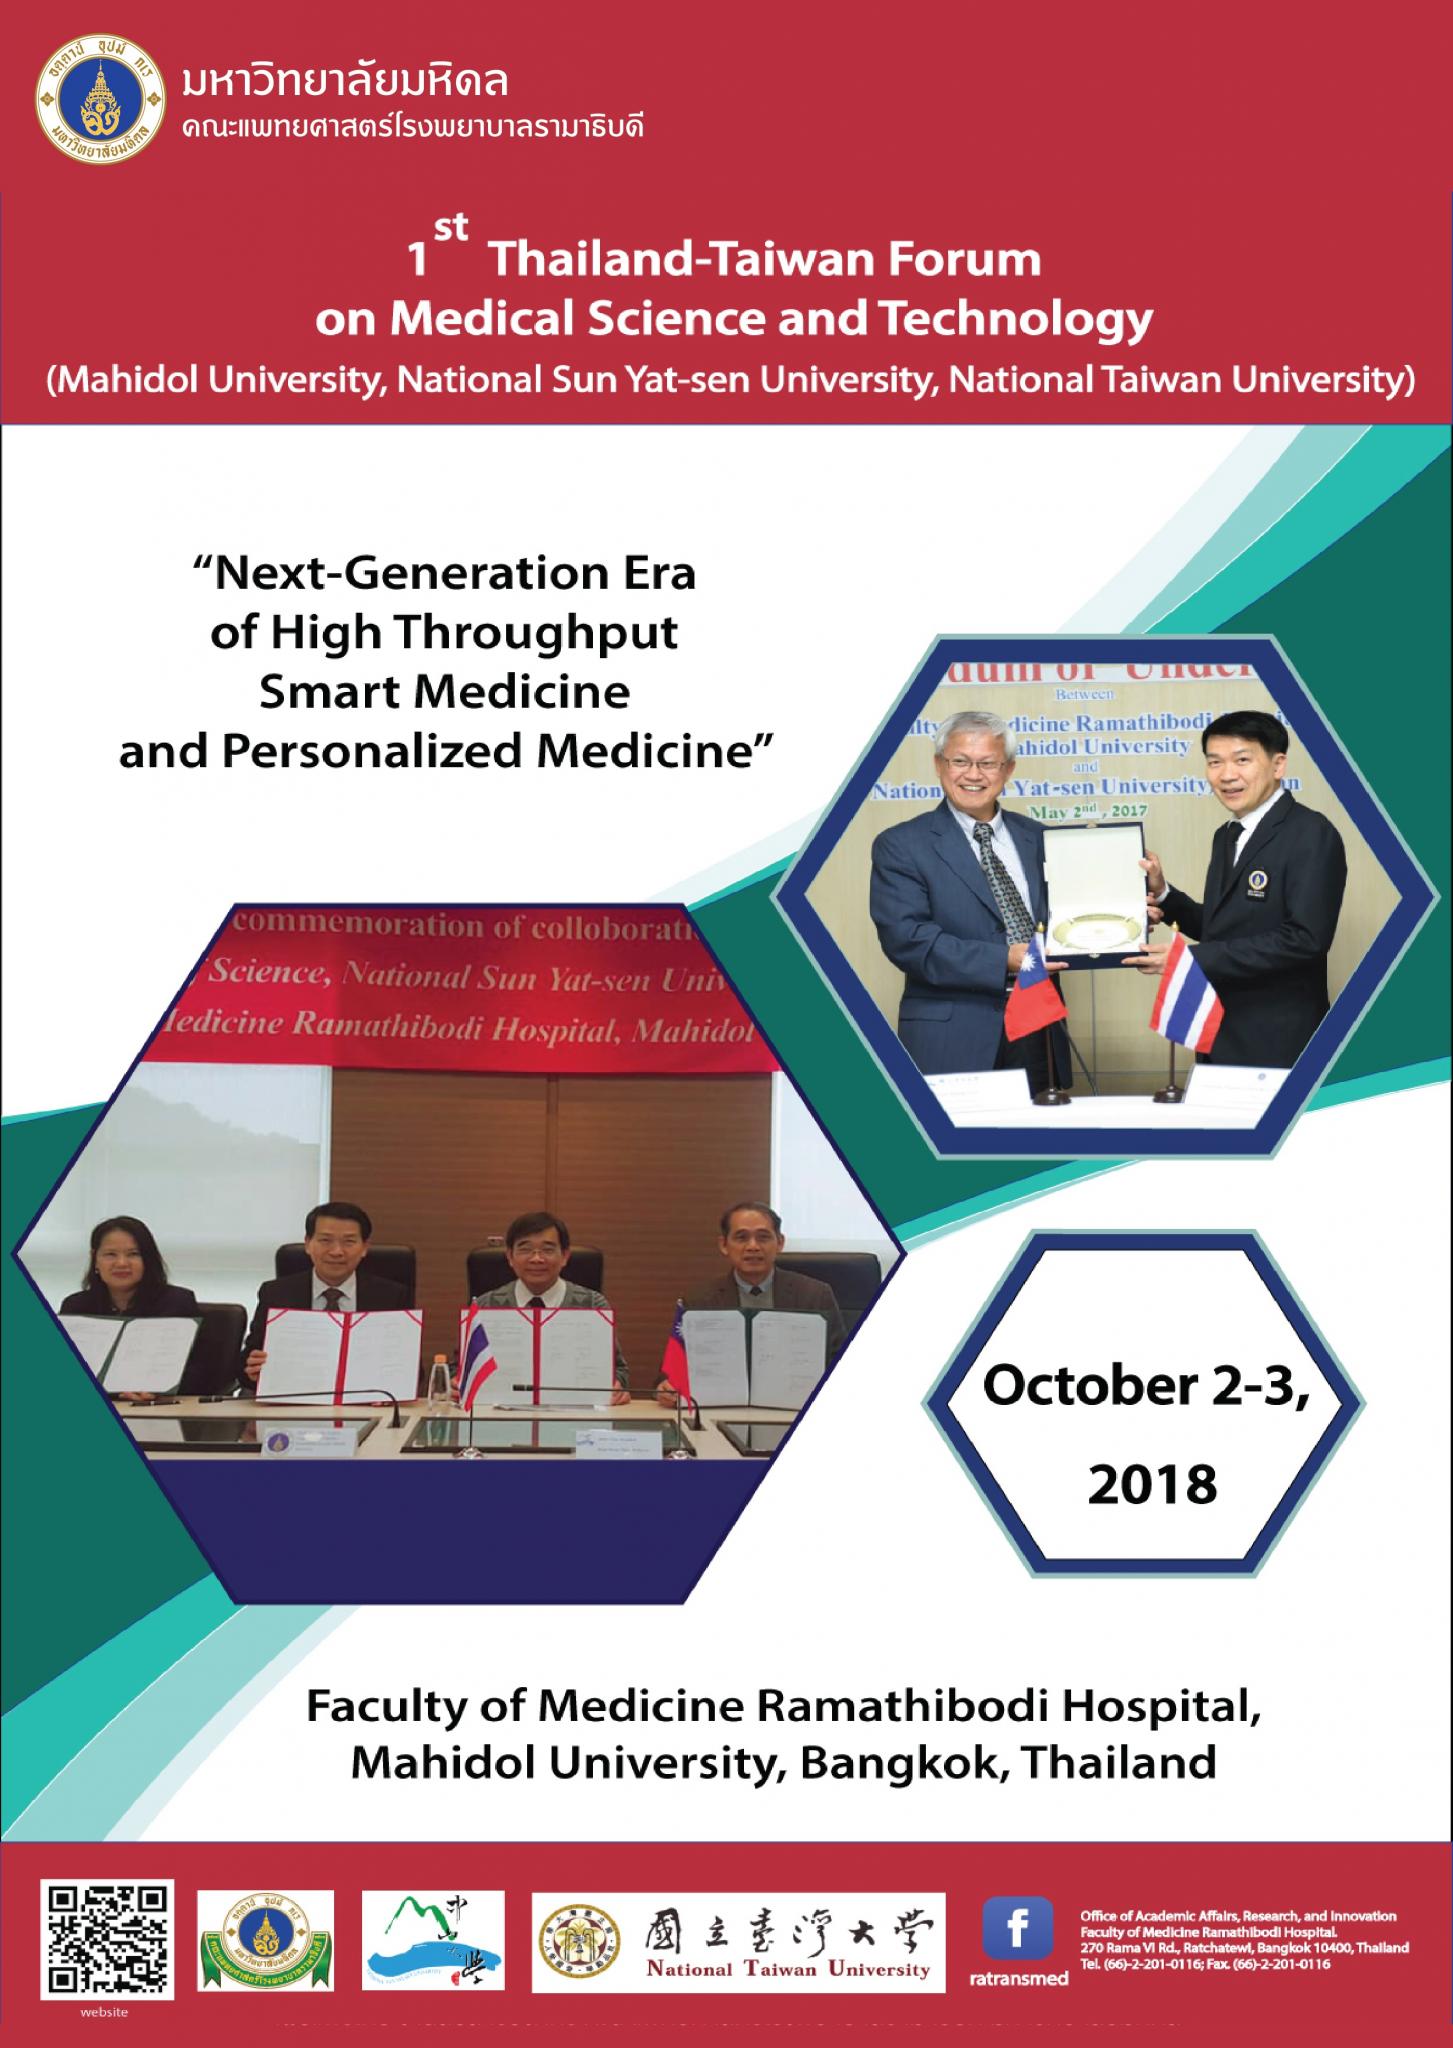 The 1st Thailand-Taiwan Forum on Medical Science and Technology